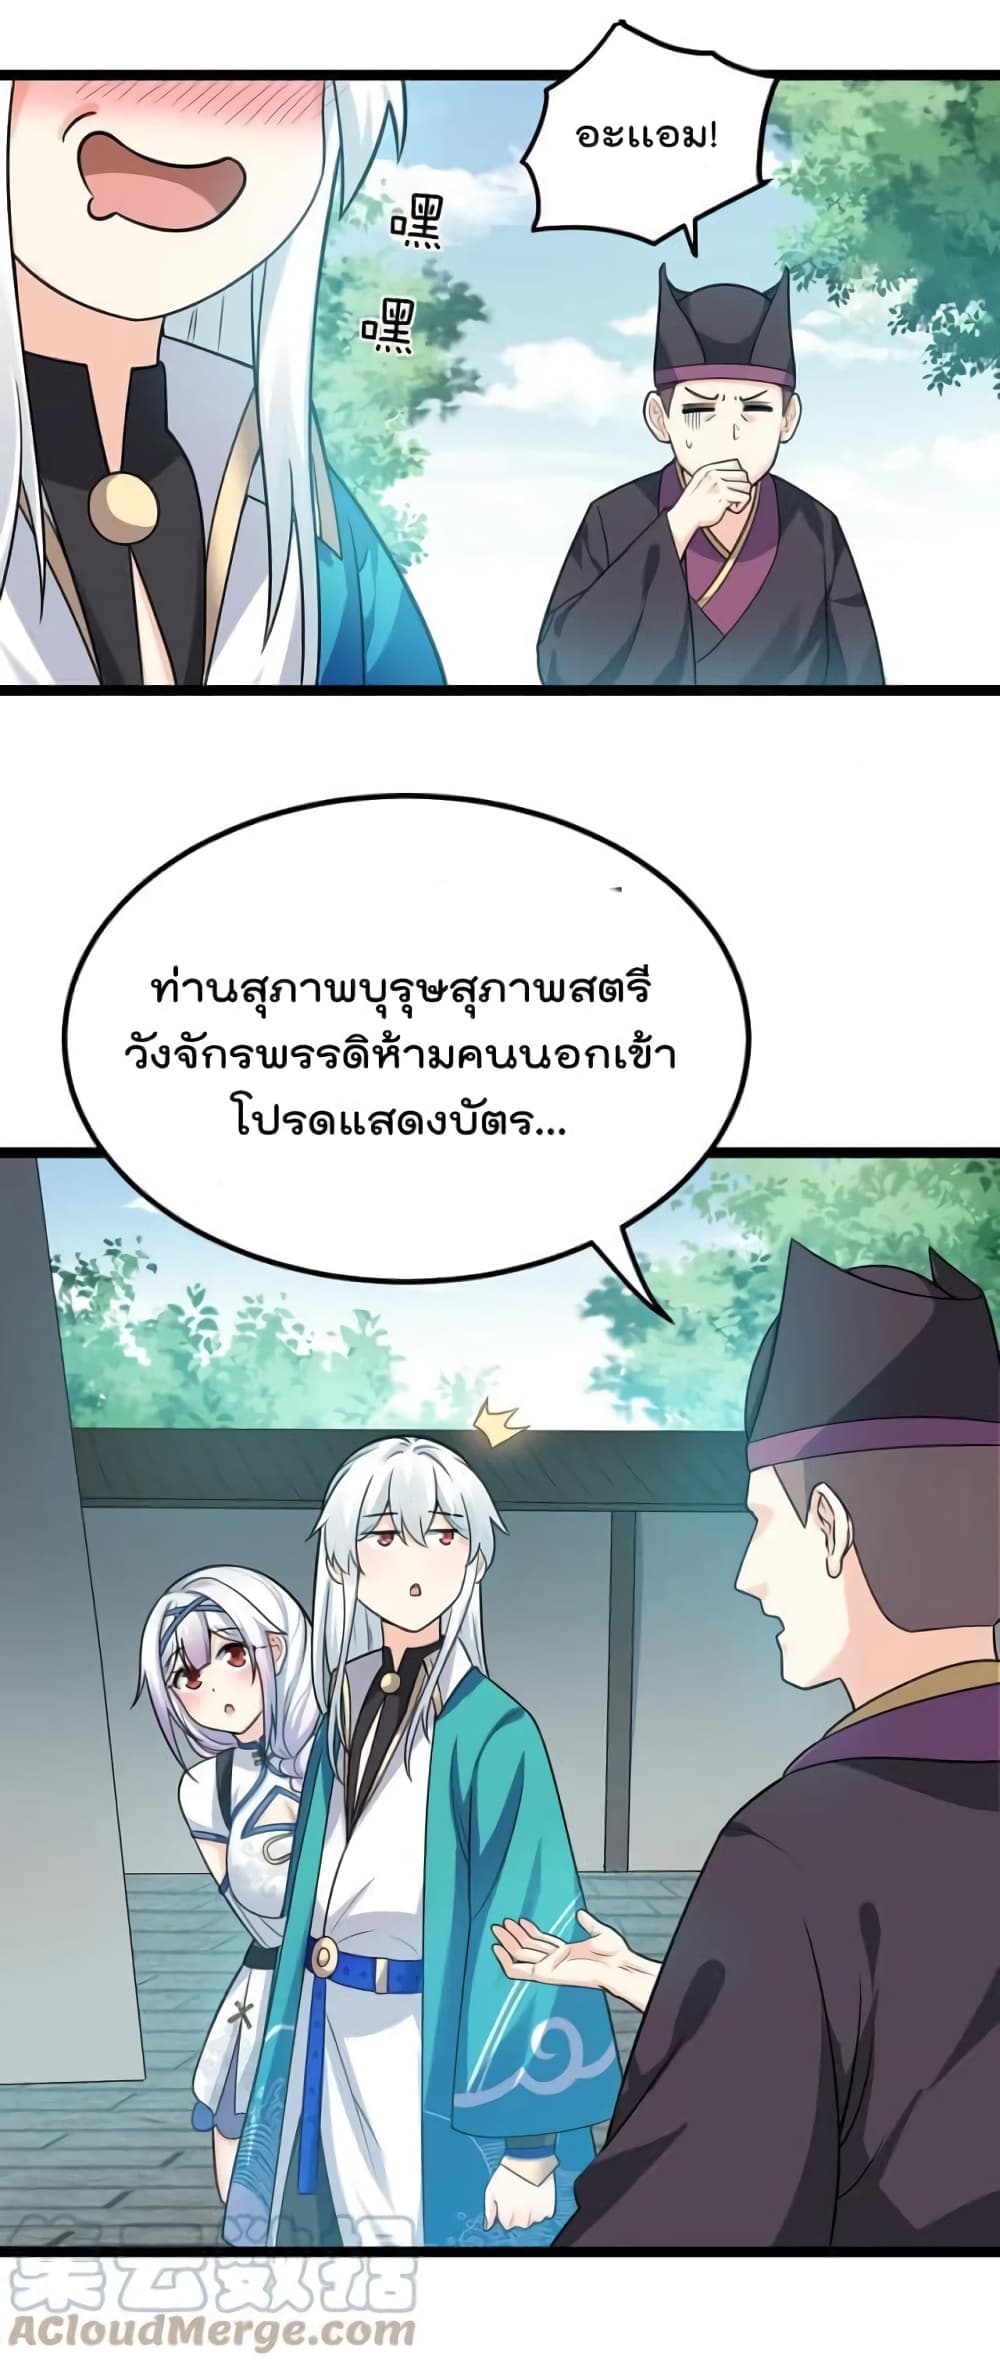 Godsian Masian from Another World ตอนที่ 113 (19)